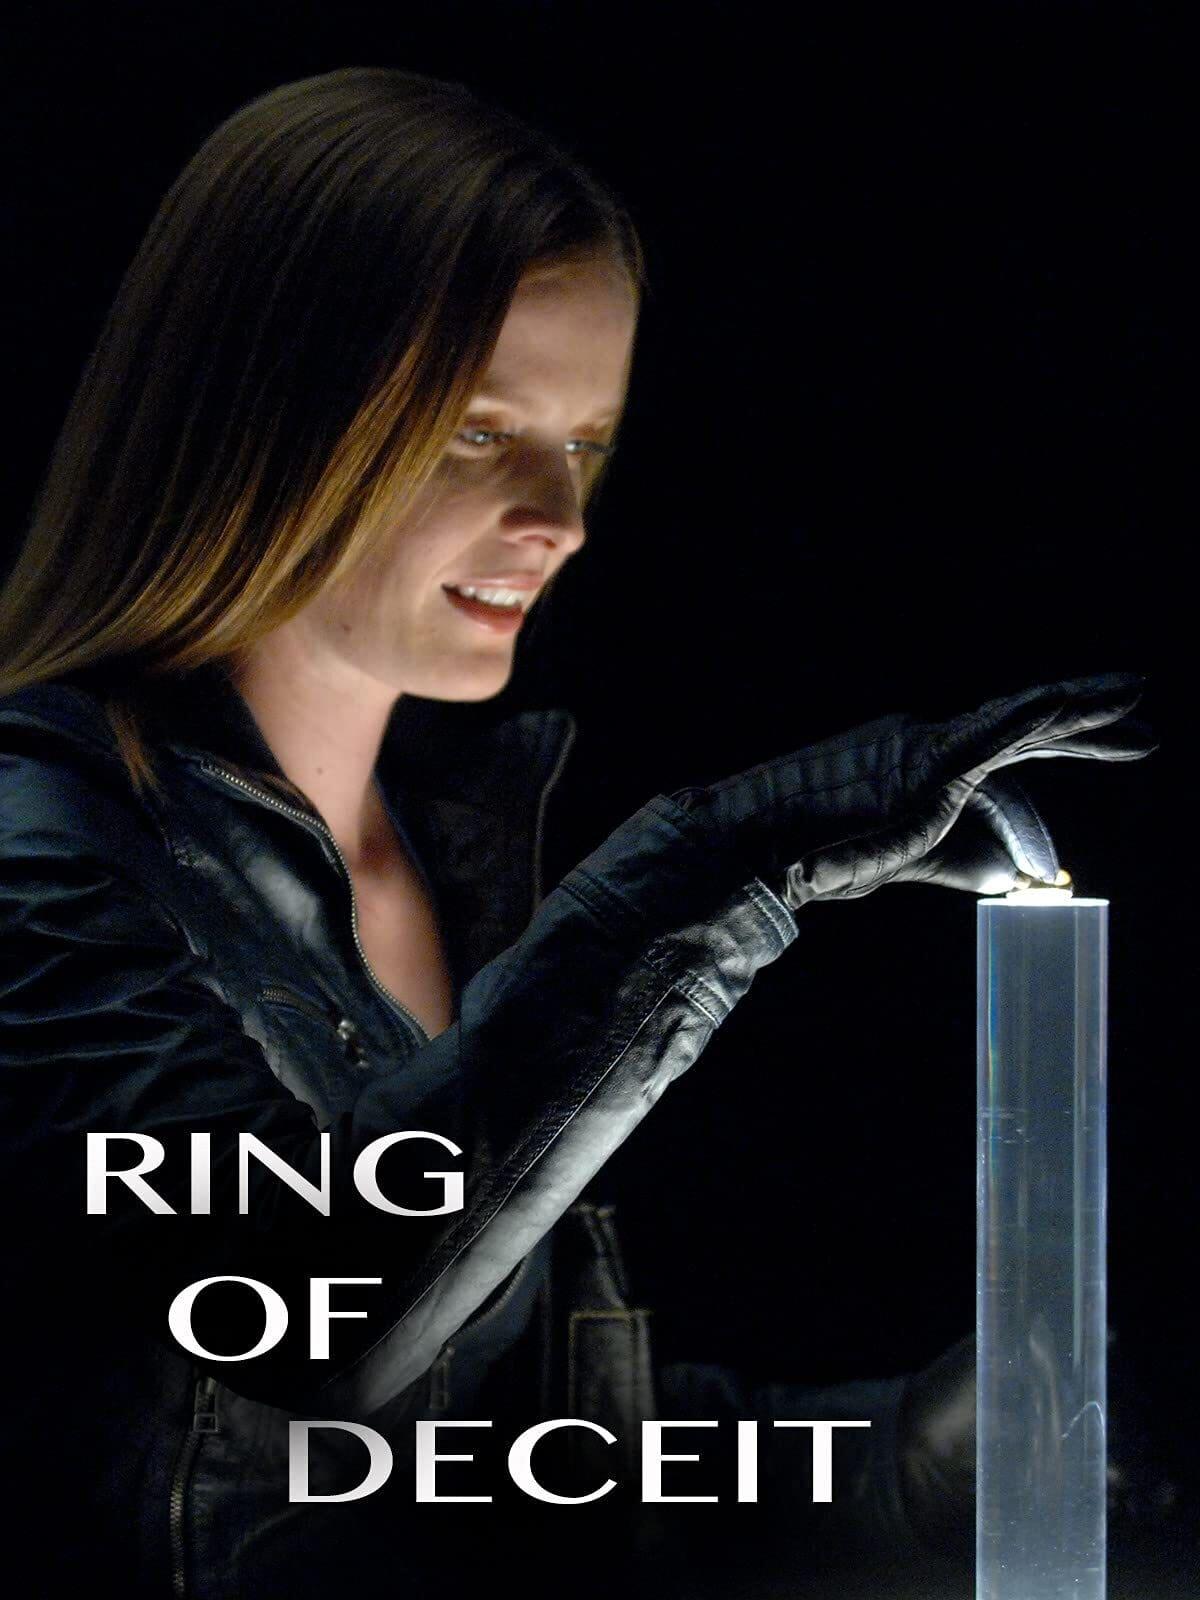 Ring of Deceit poster